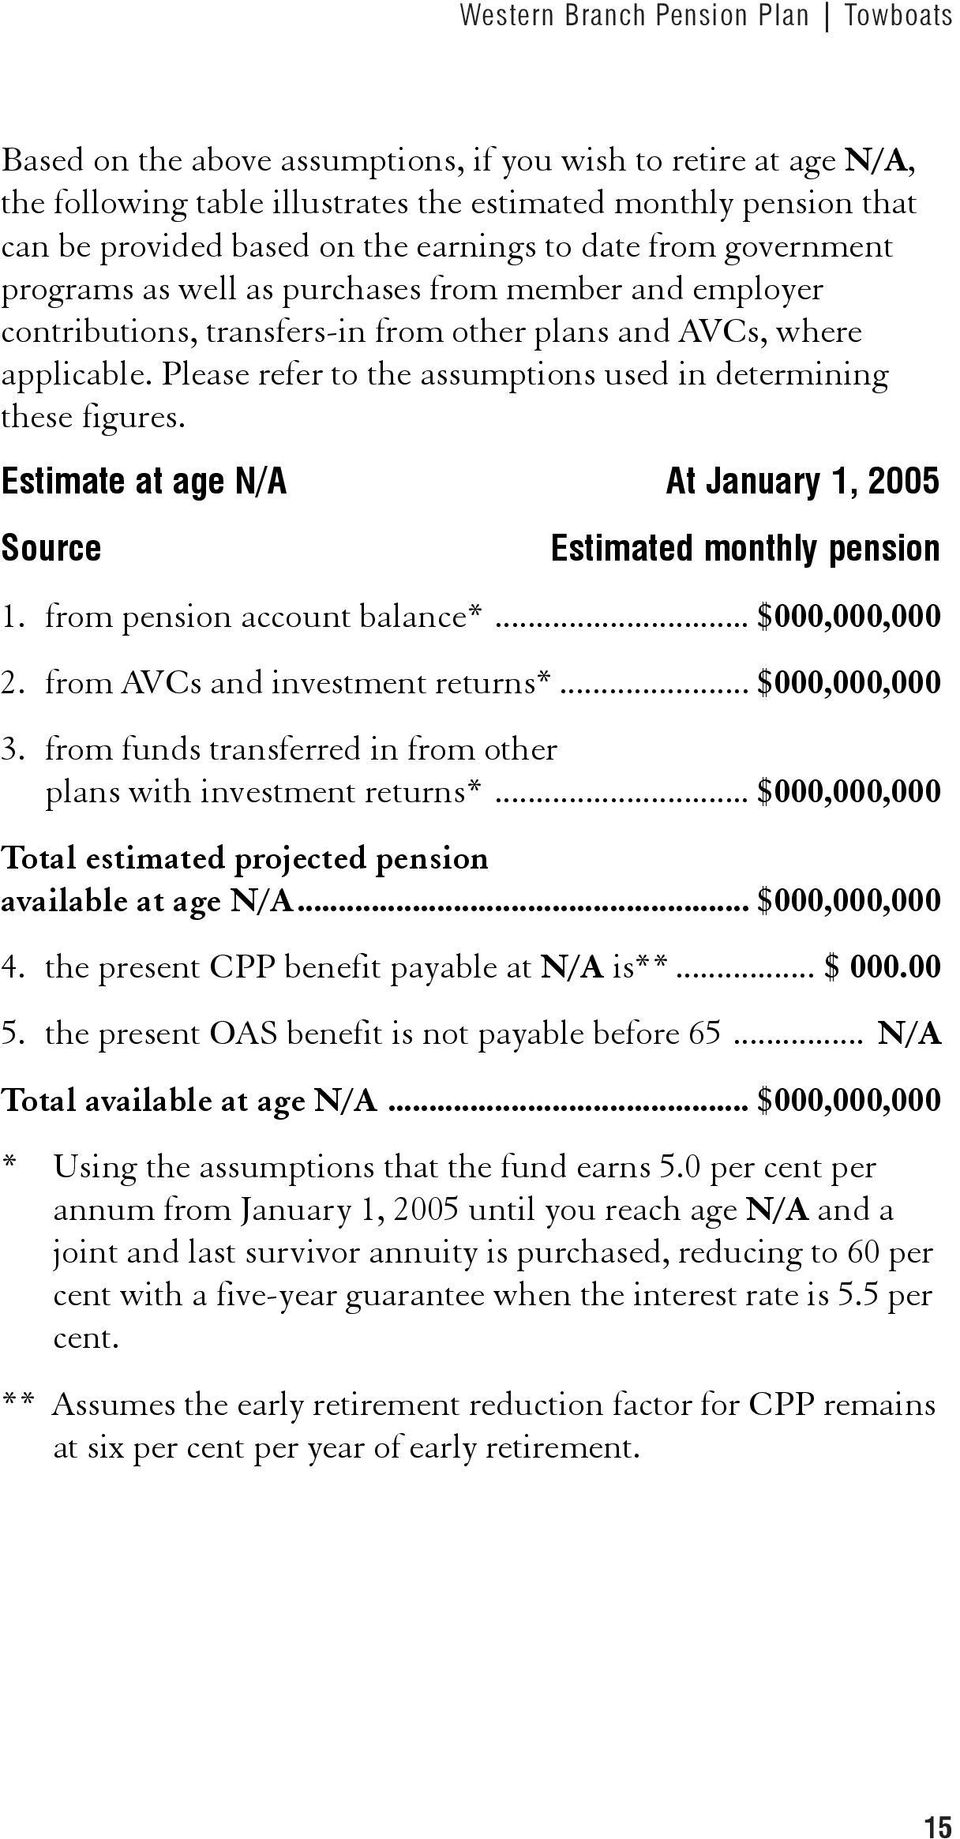 Please refer to the assumptions used in determining these figures. Estimate at age N/A At January 1, 2005 Source Estimated monthly pension 1. from pension account balance*... $000,000,000 2.